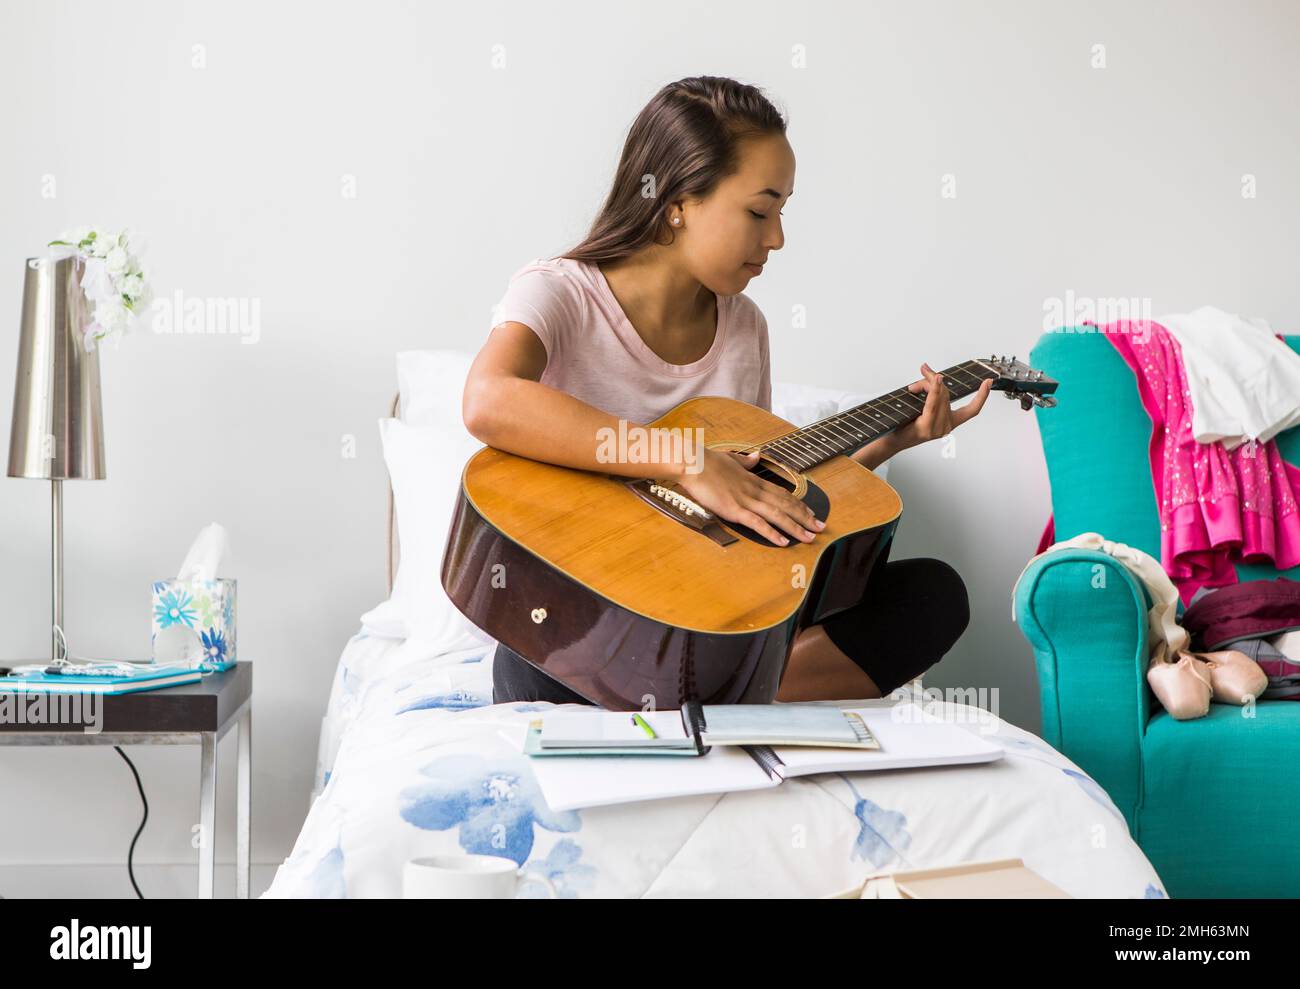 A teenage girl playing guitar in her bedroom. Stock Photo